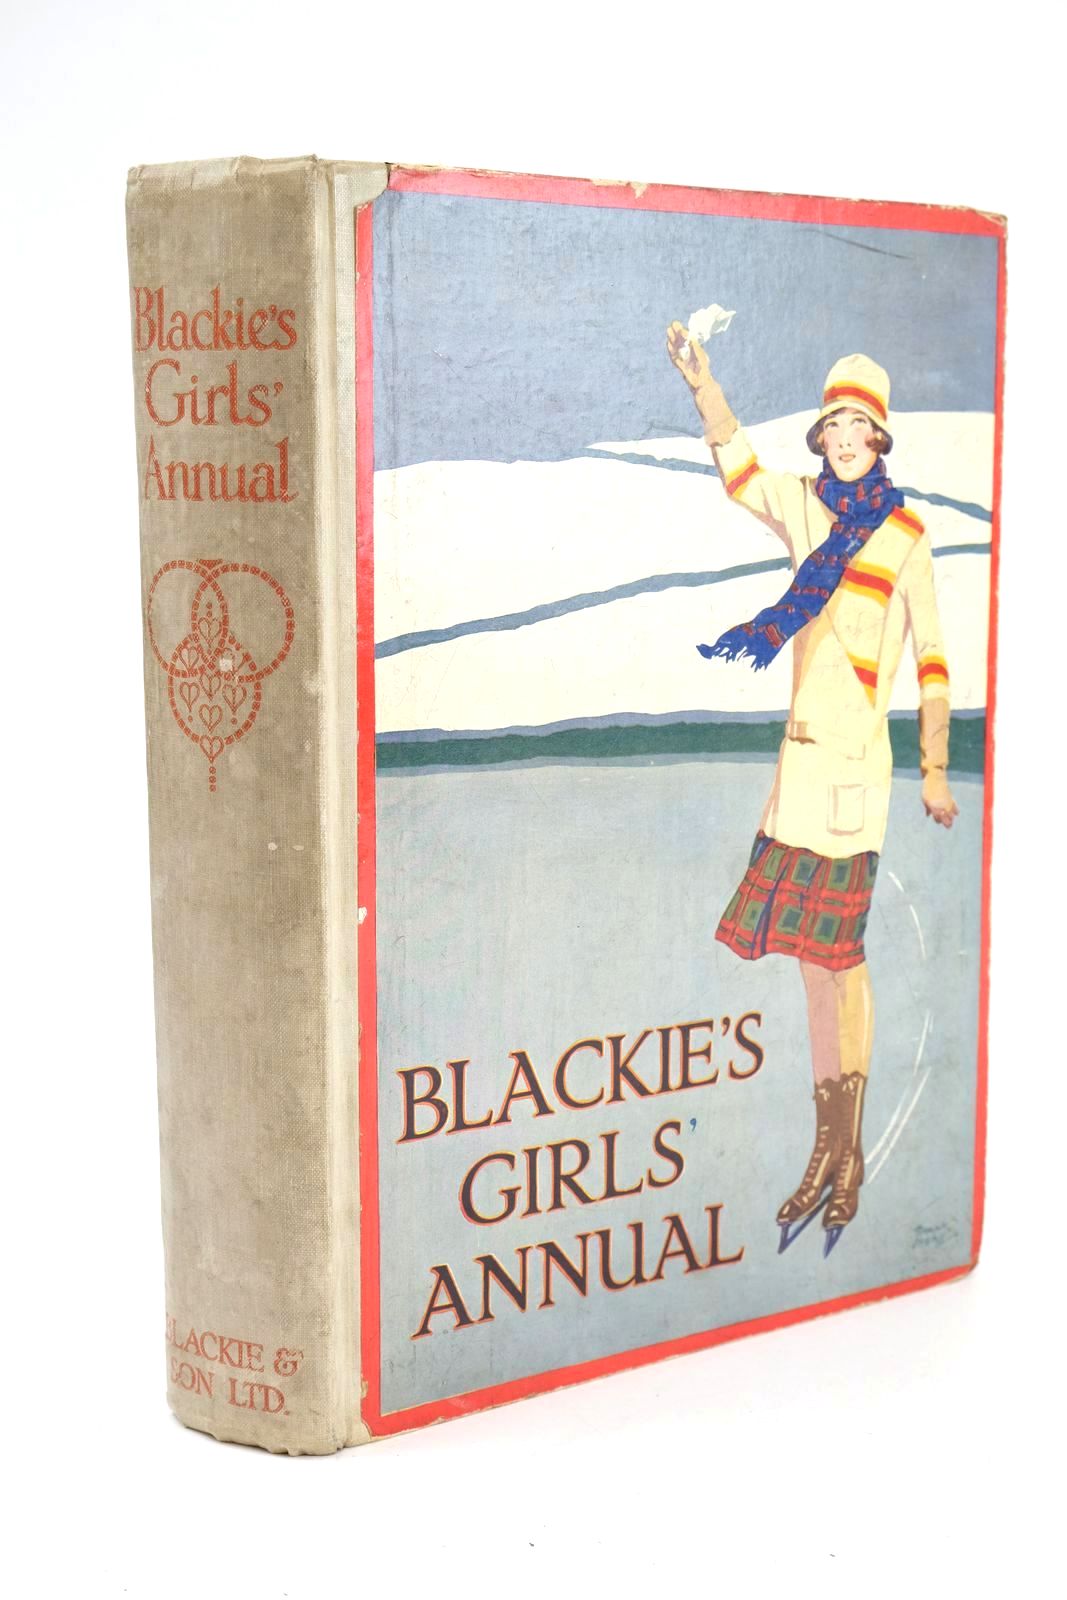 Photo of BLACKIE'S GIRLS' ANNUAL written by Joan, Natalie Harrison, Florence Bickersteth, Lucy Middleton, Margaret et al, illustrated by Wiles, Frank E. Harrison, Florence Wilson, Radcliffe Brock, C.E. et al., published by Blackie &amp; Son Ltd. (STOCK CODE: 1324978)  for sale by Stella & Rose's Books